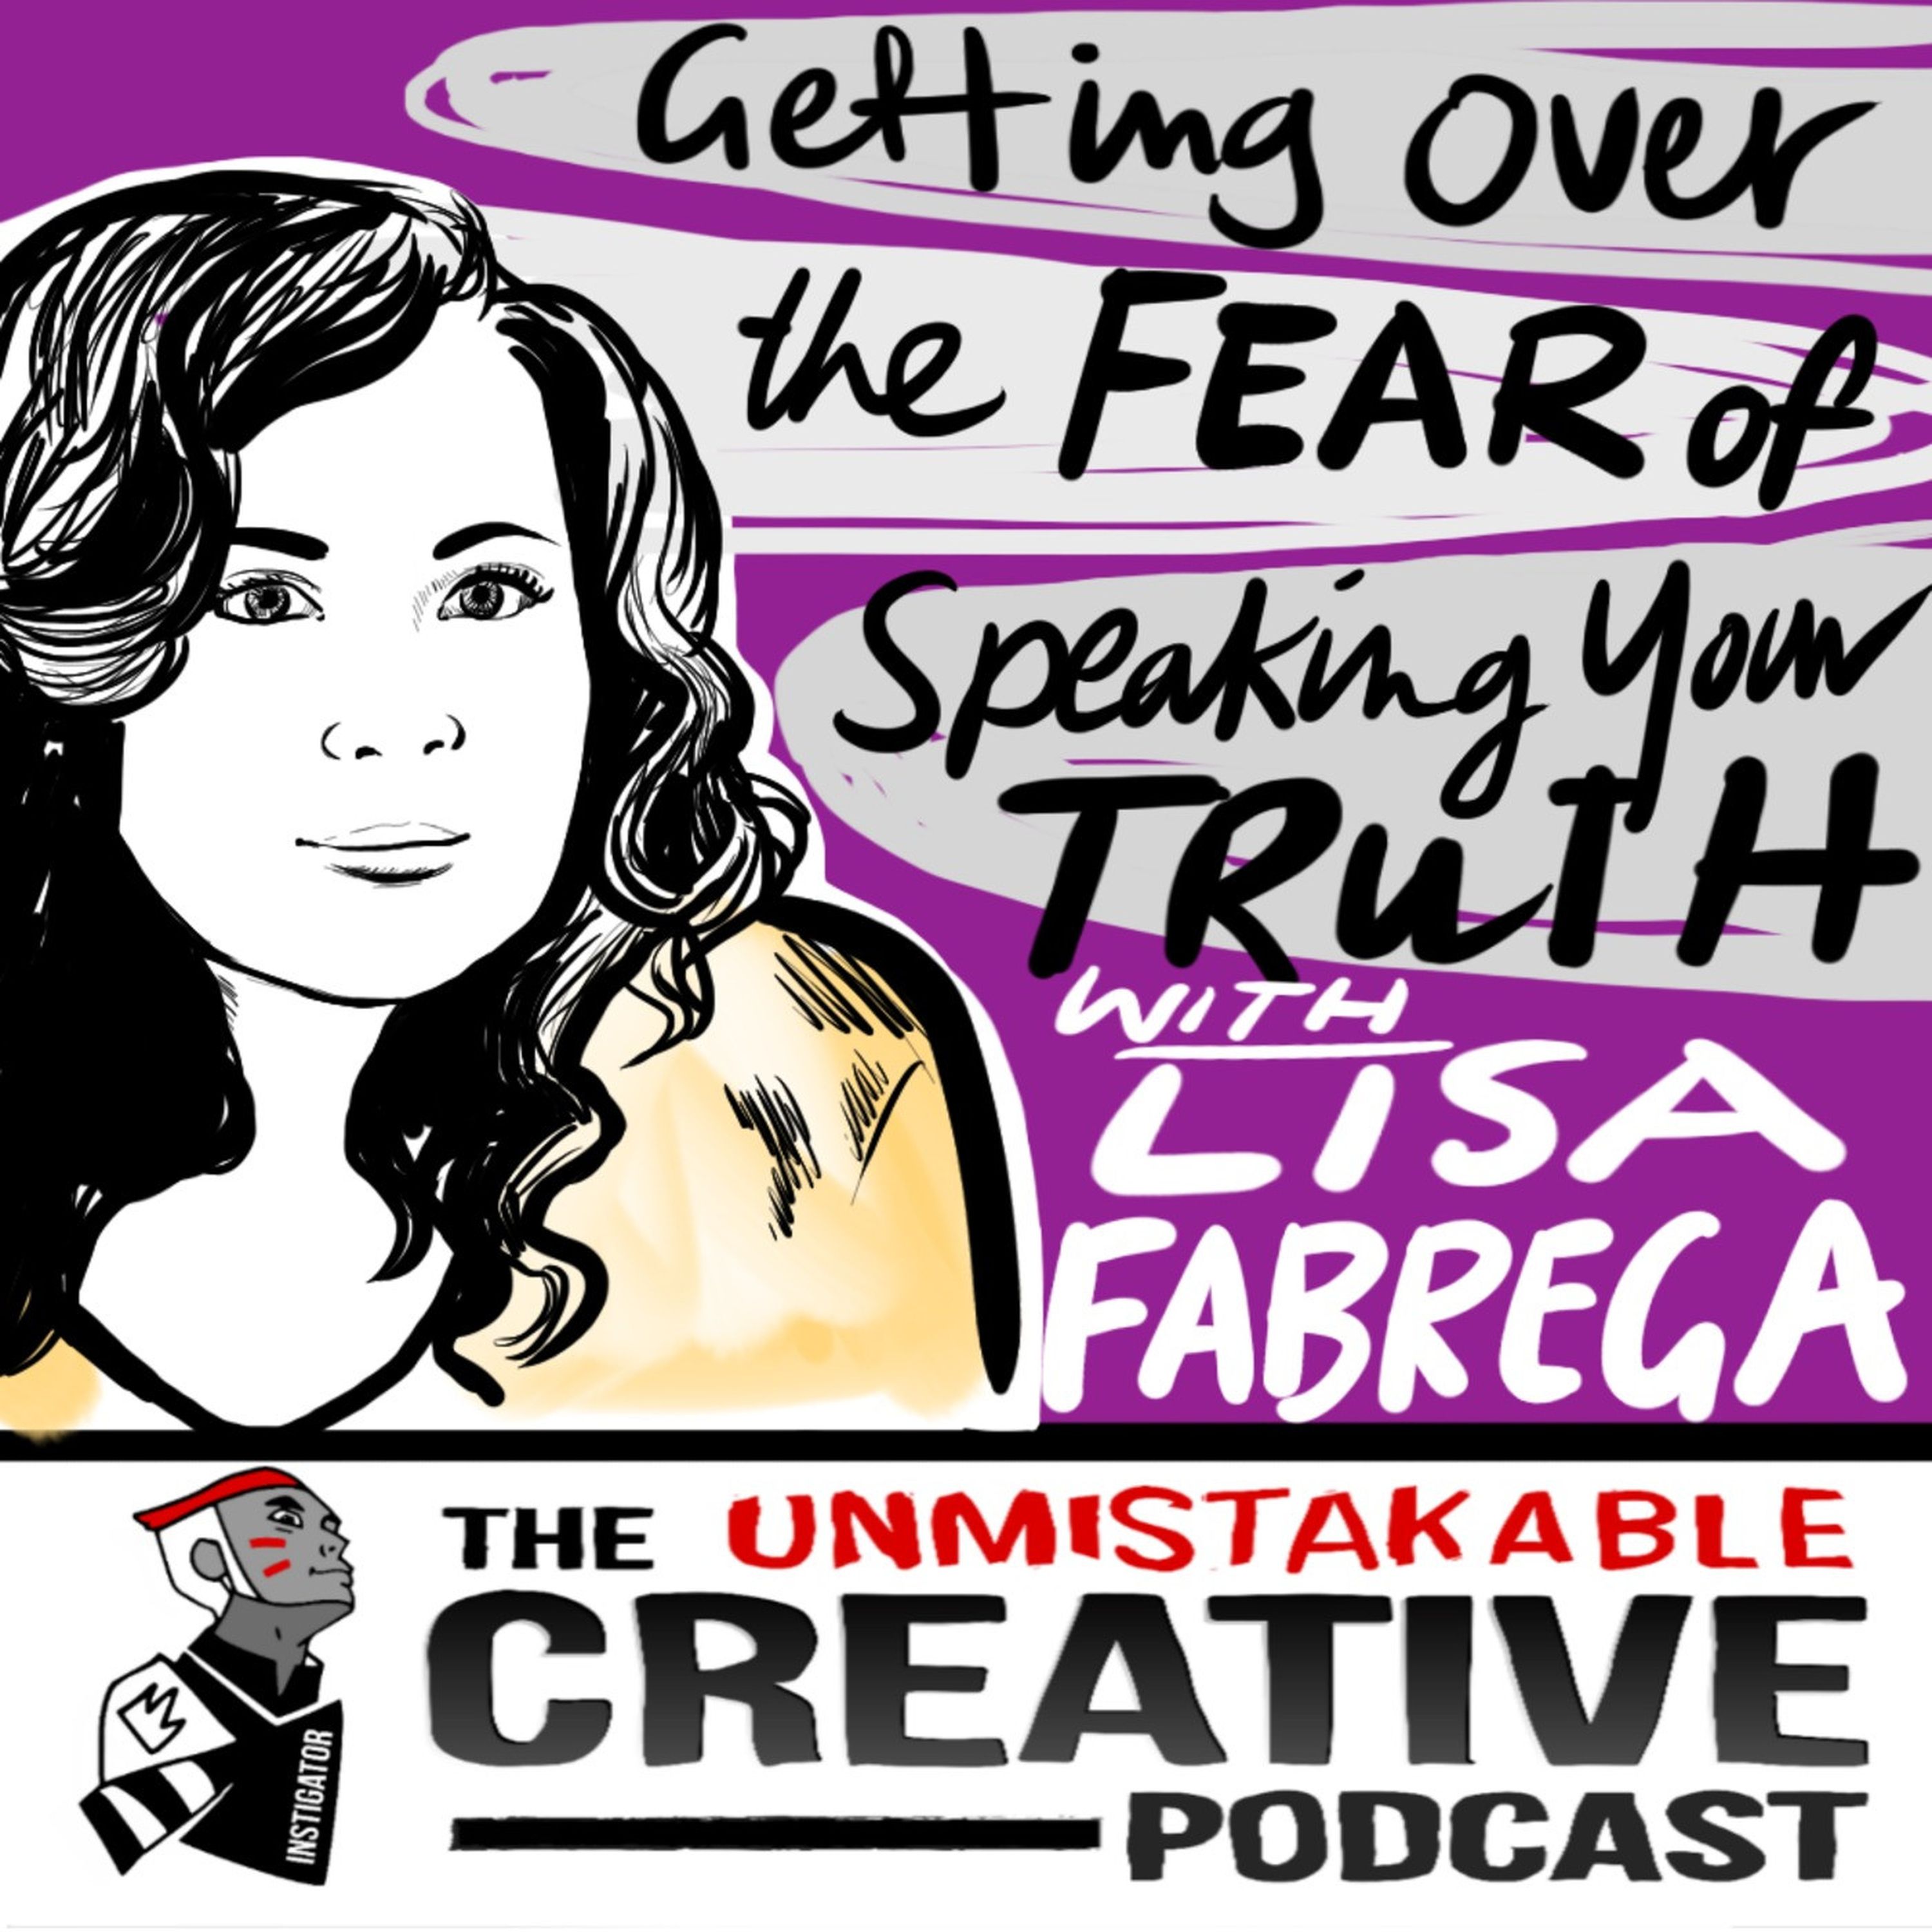 Getting Over the Fear of Speaking Your Truth with Lisa Fabrega